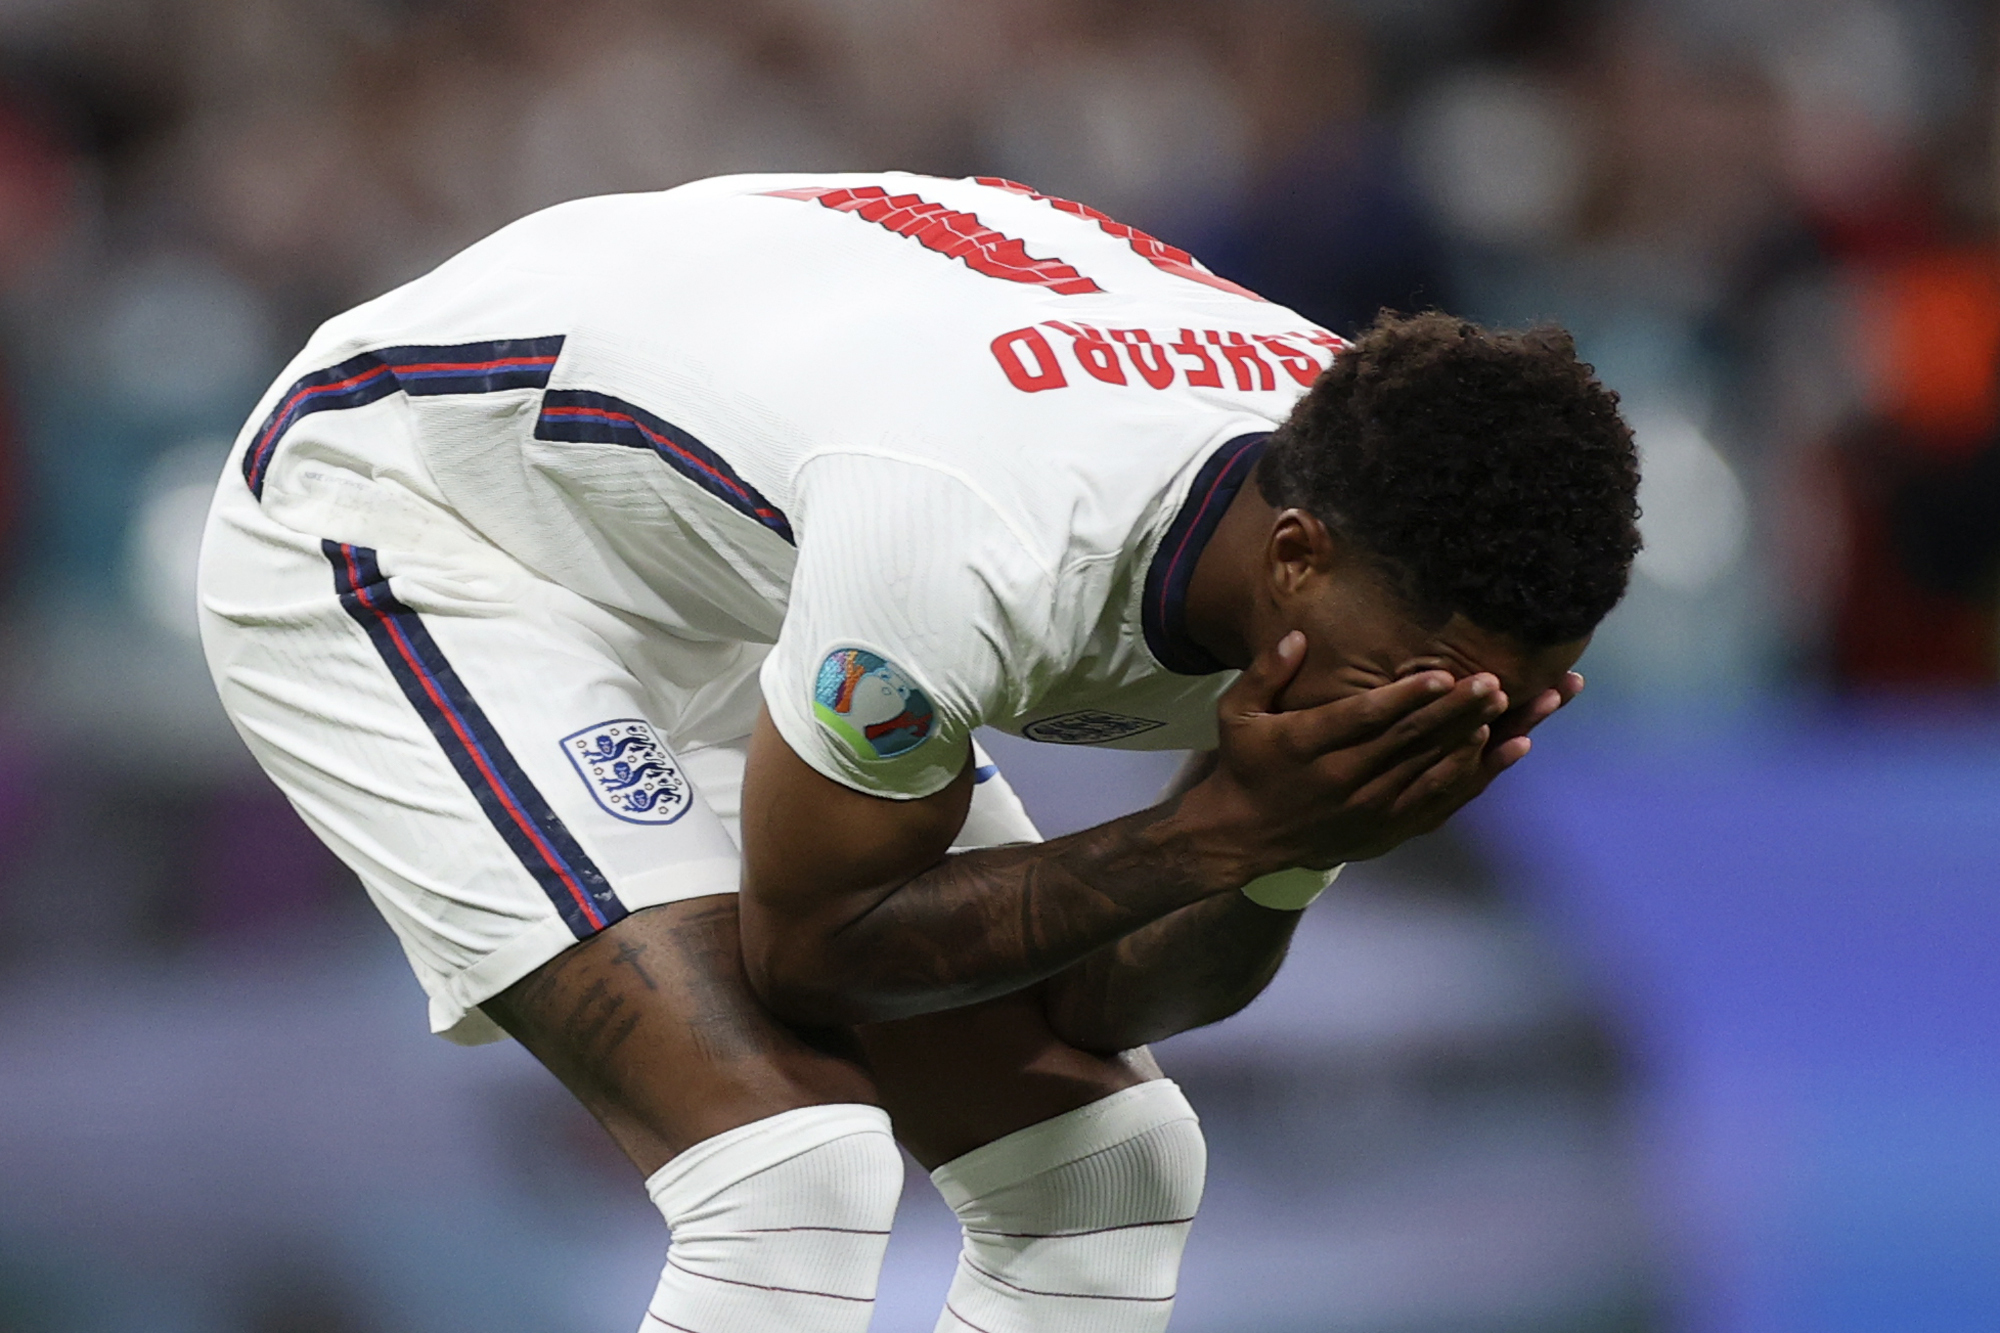 Marcus Rashford on Penalty Miss in Euro 2020 Final vs. Italy: 'I'll Be Back Stronger' | Bleacher Report | Latest News, Videos and Highlights